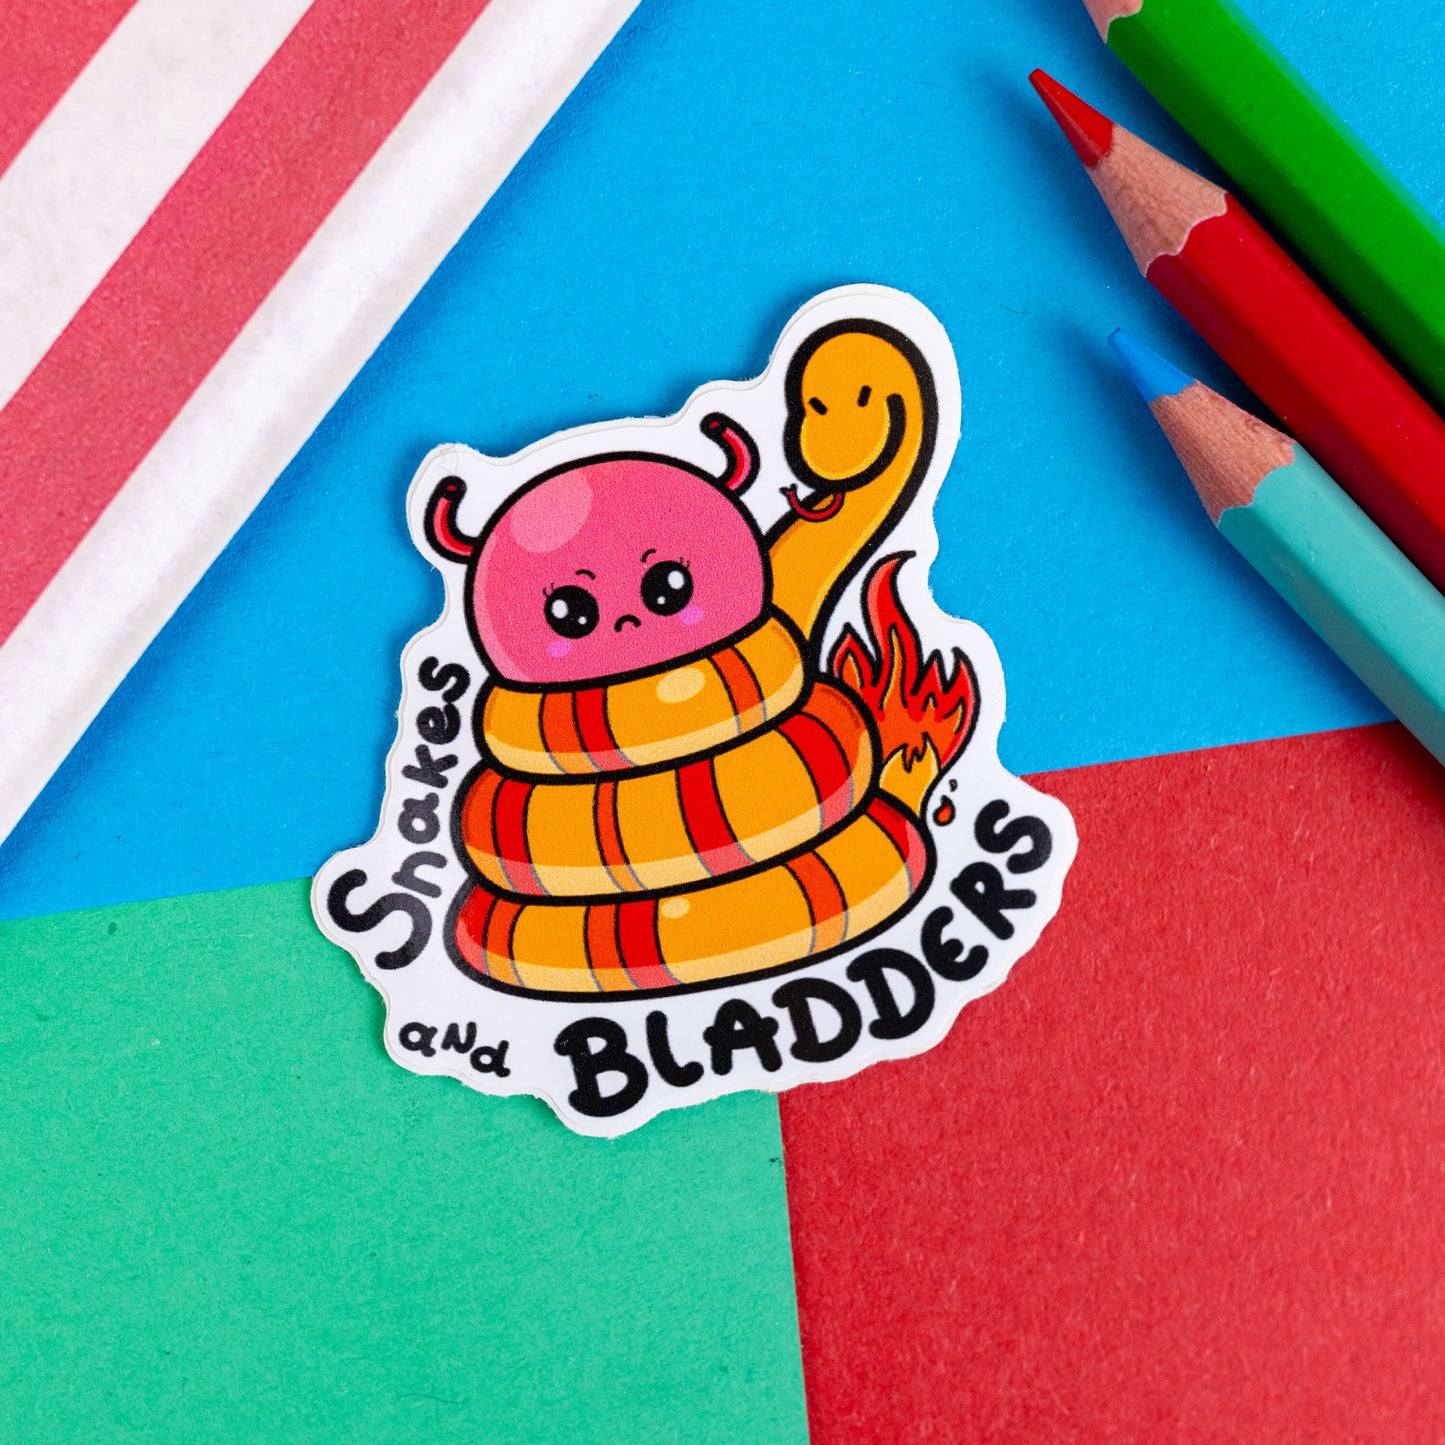 A sticker with a snake wrapped around an angry looking bladder with a face with the words snakes and bladders around the bottom. The sticker is laid on a blue, green and red background with pencils and a striped bag in the corners